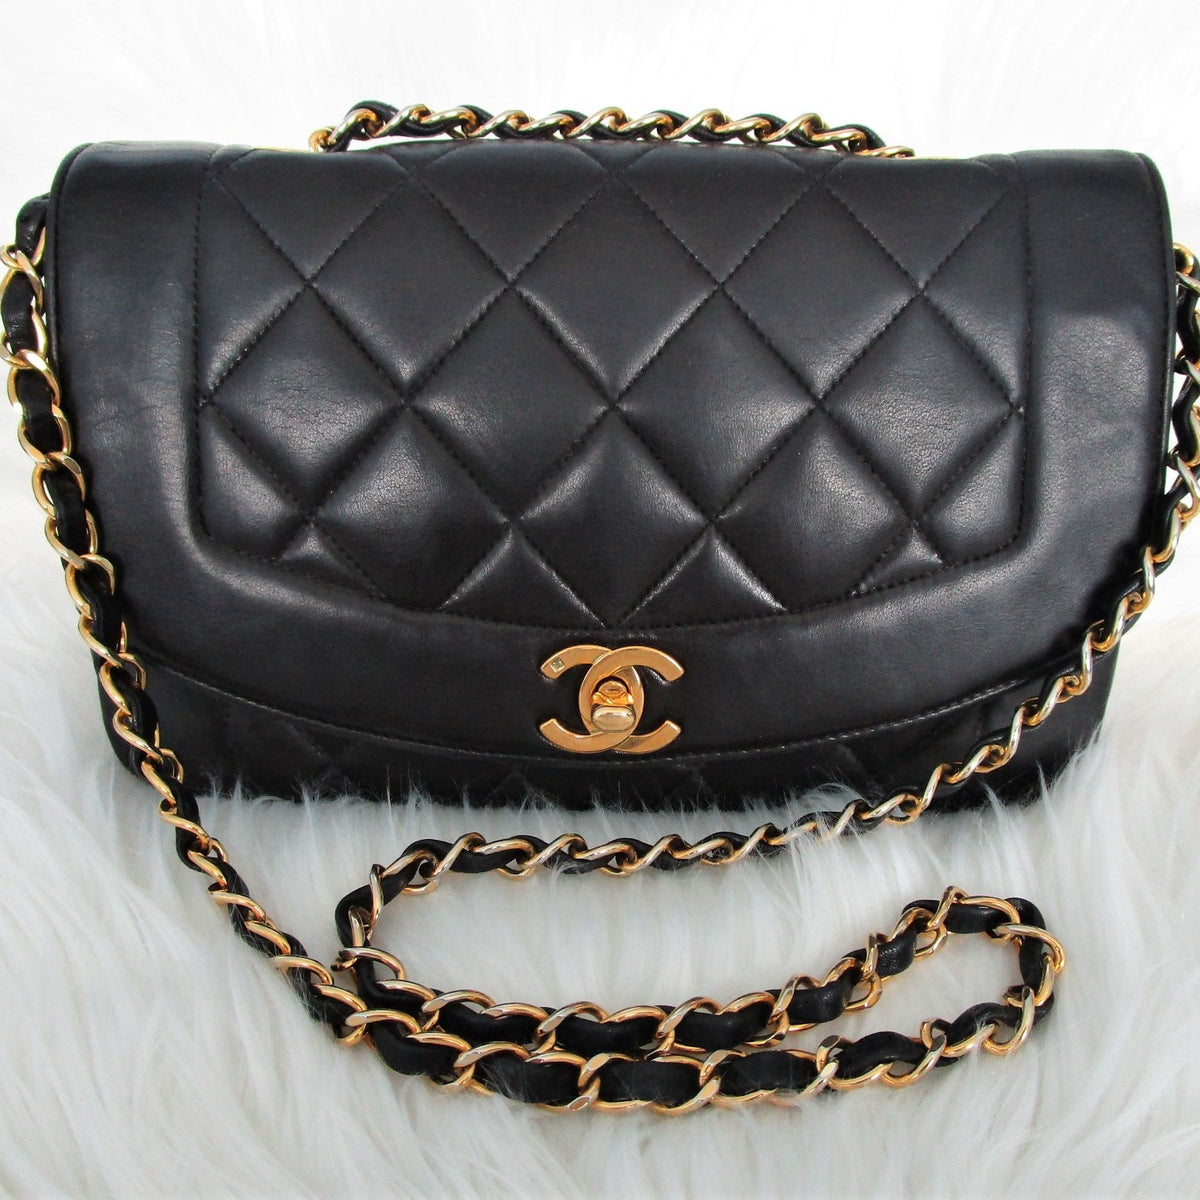 How to Shop for Vintage Luxury Handbags - My Chanel Purse